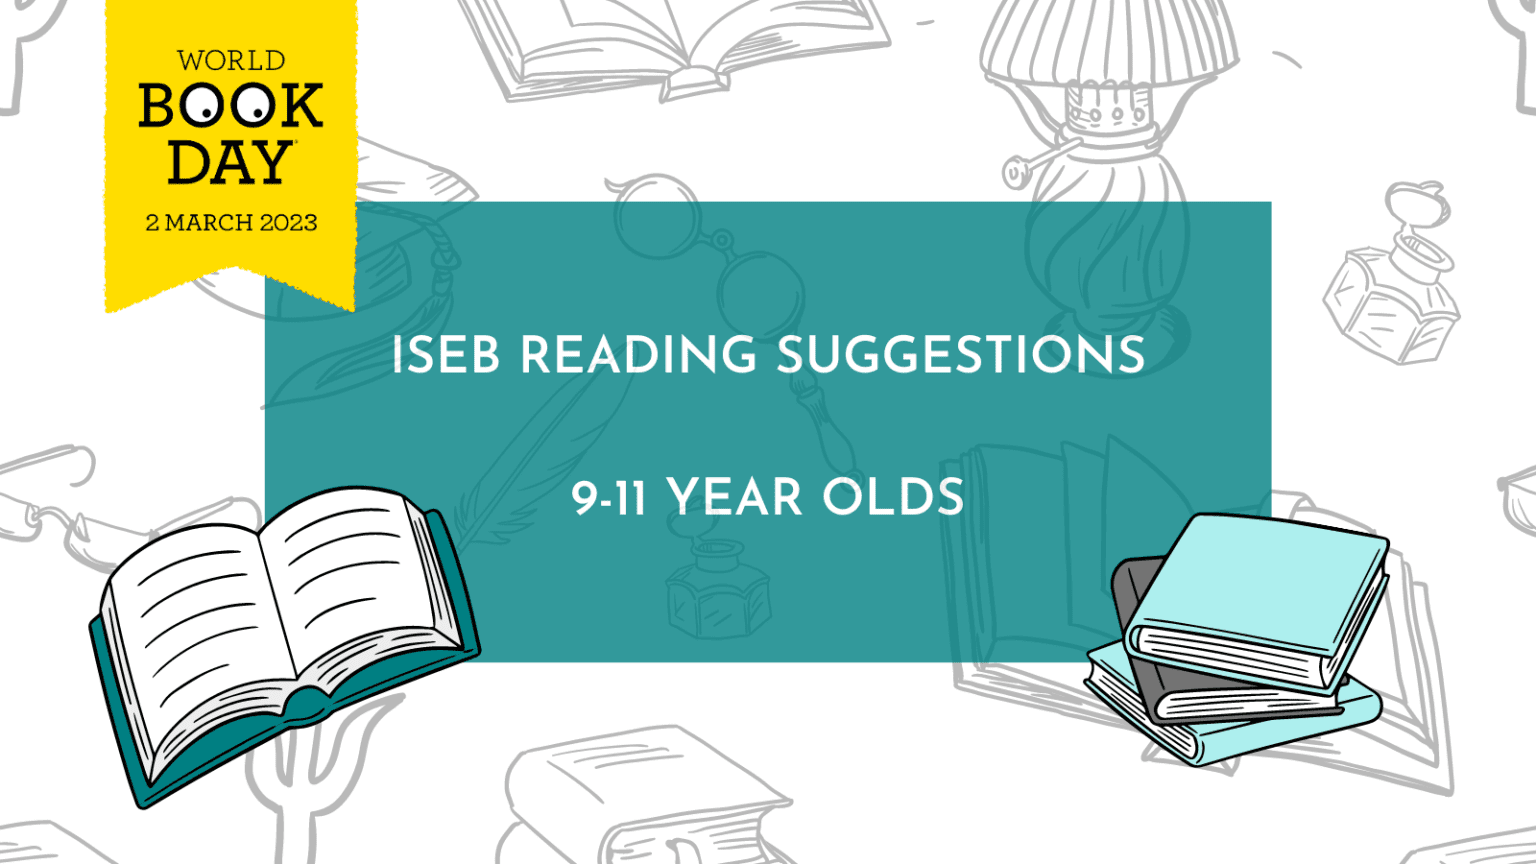 world-book-day-reading-suggestions-for-9-11-year-olds-iseb